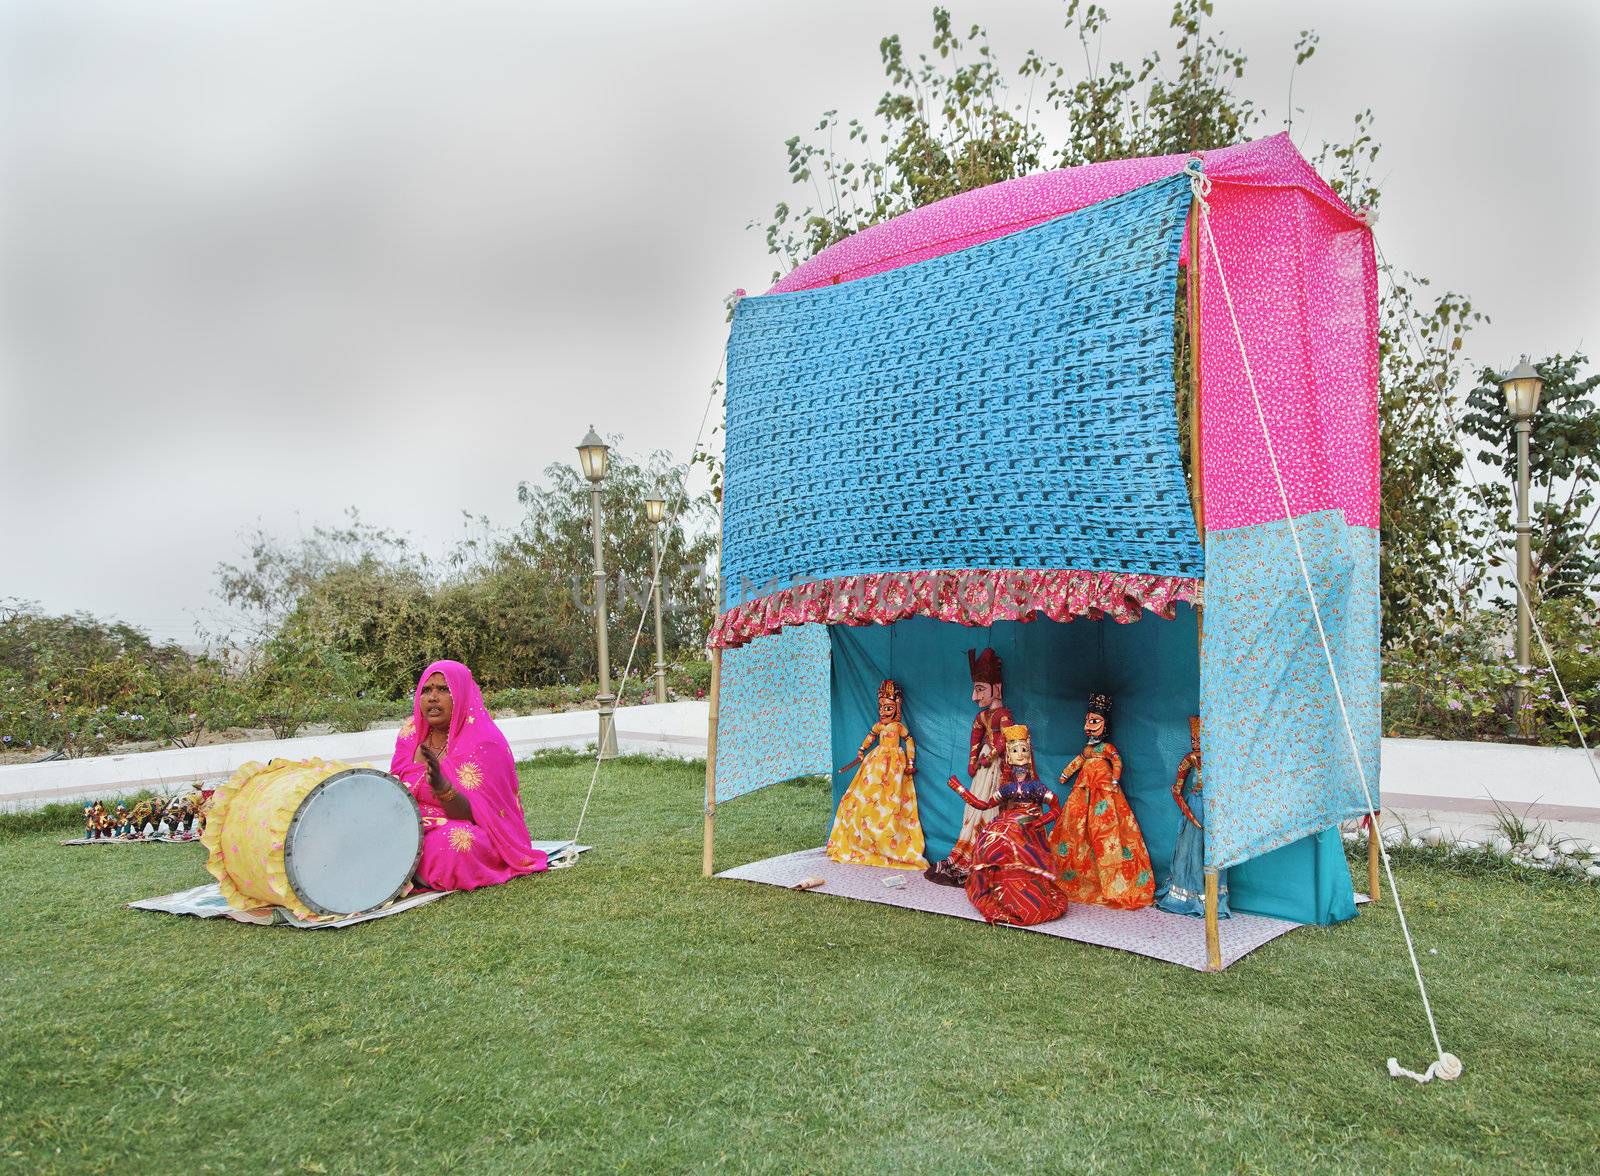 Landscape in a garden of a performance by local puppeteers during and early evening performance, Rajasthan, Indian - March 7, 2012